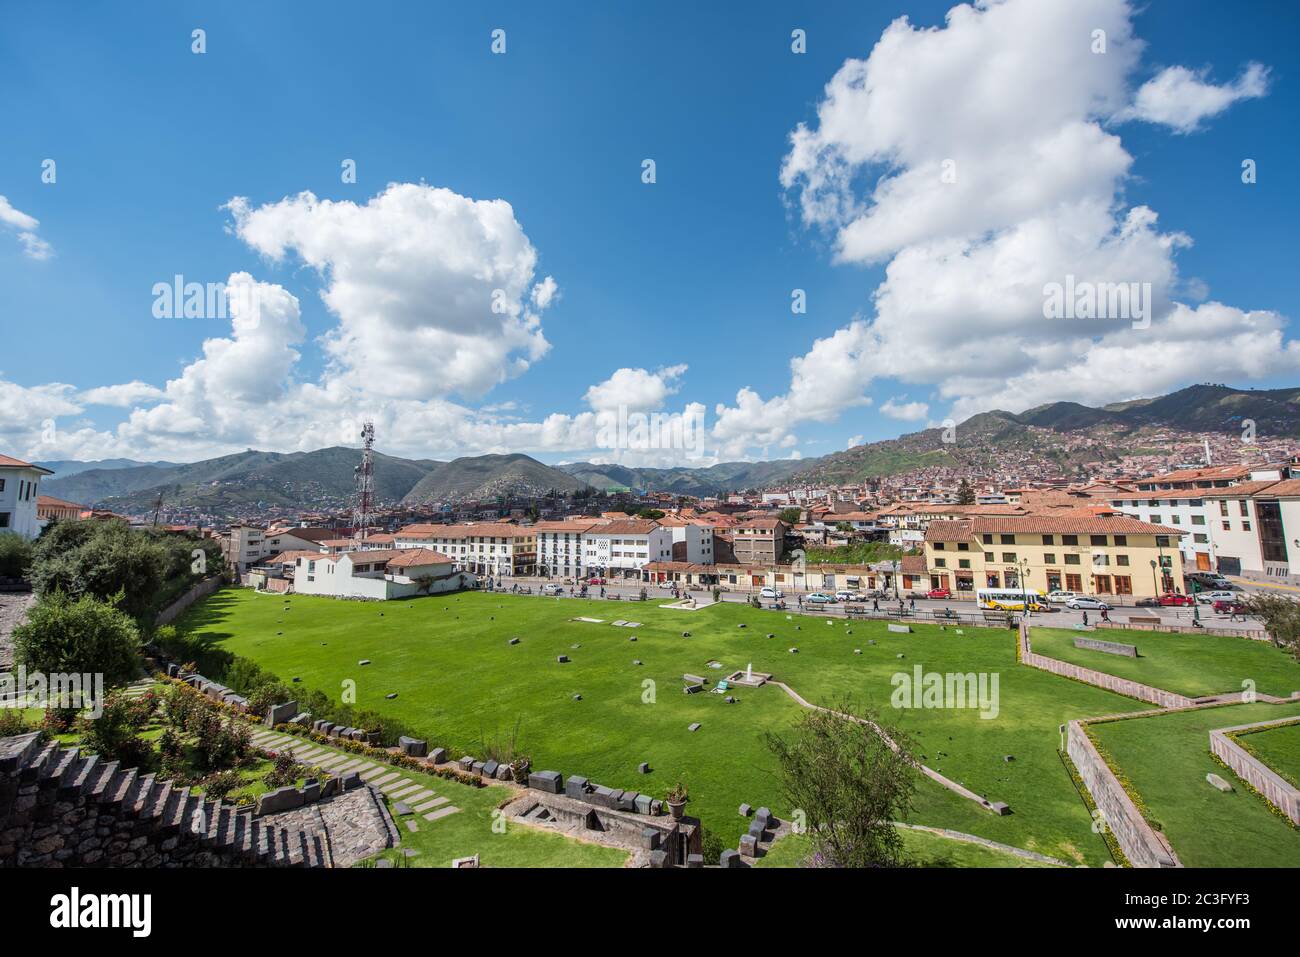 Cityscape of Cusco Old City as seen from the Incan Sun Temple Coricancha, Cusco. Stock Photo